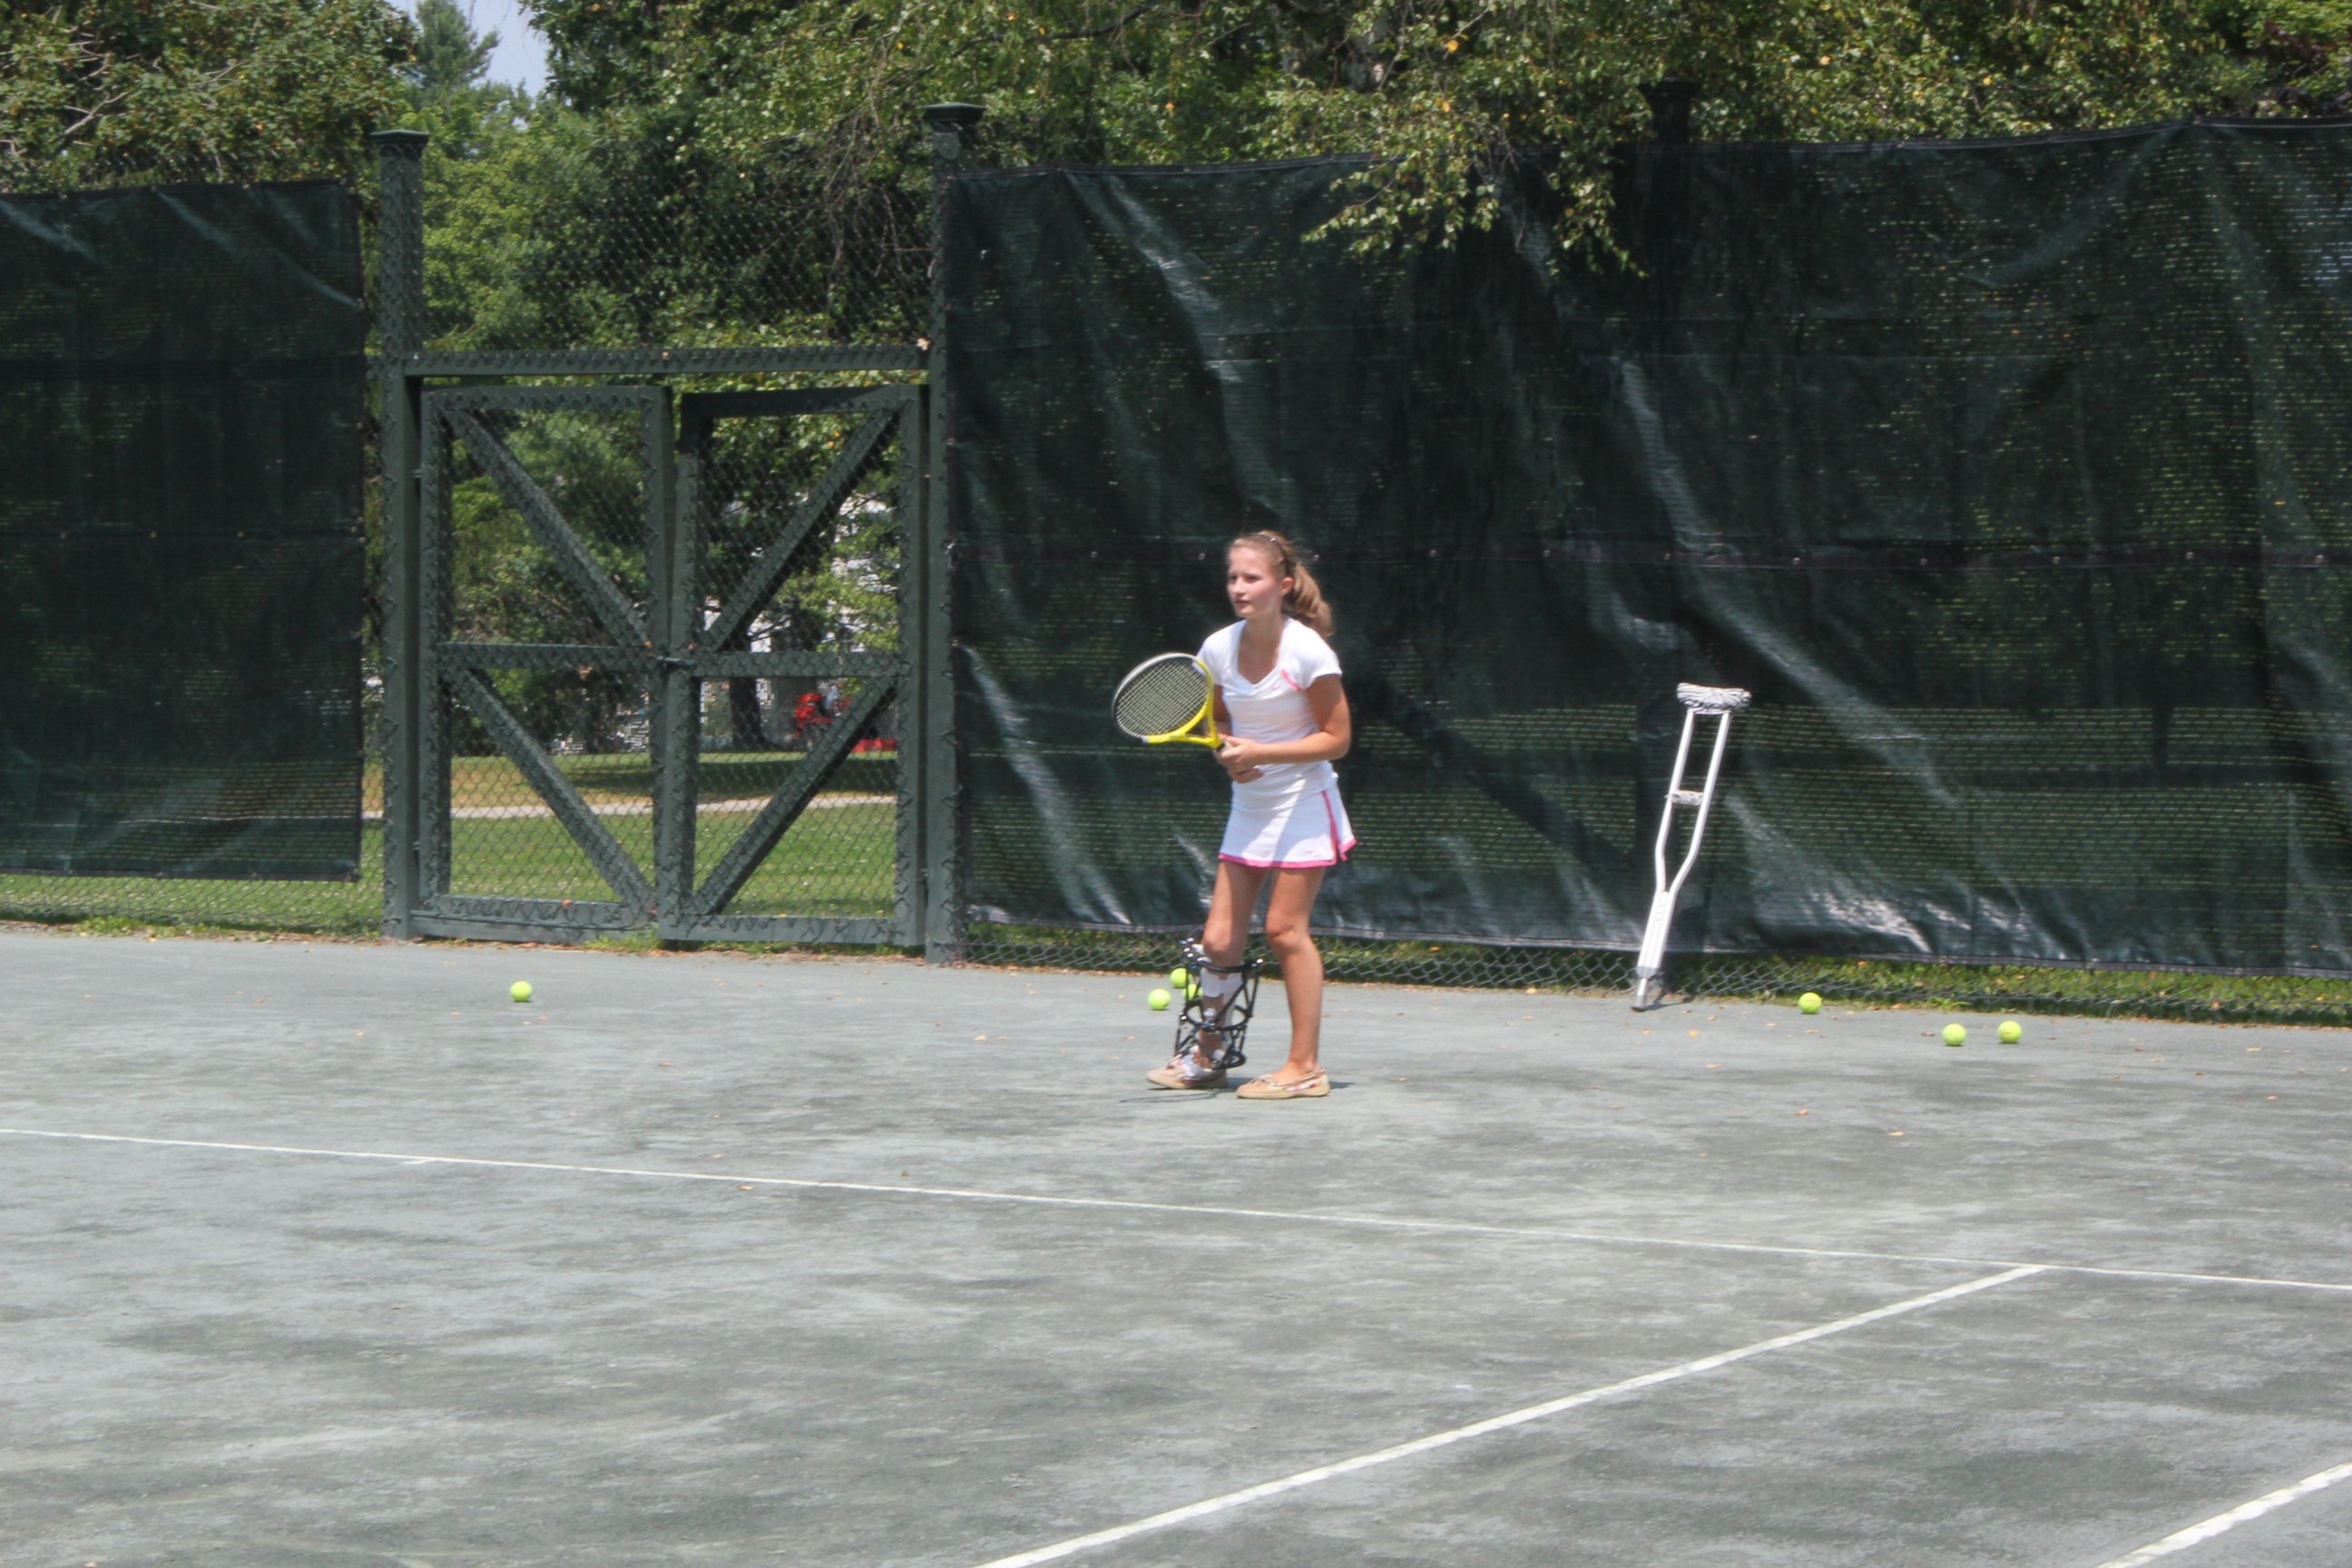 PHOTO: It took more than a year, but Charlotte's right leg is now just as long as her left, and she is able to get back to playing tennis.